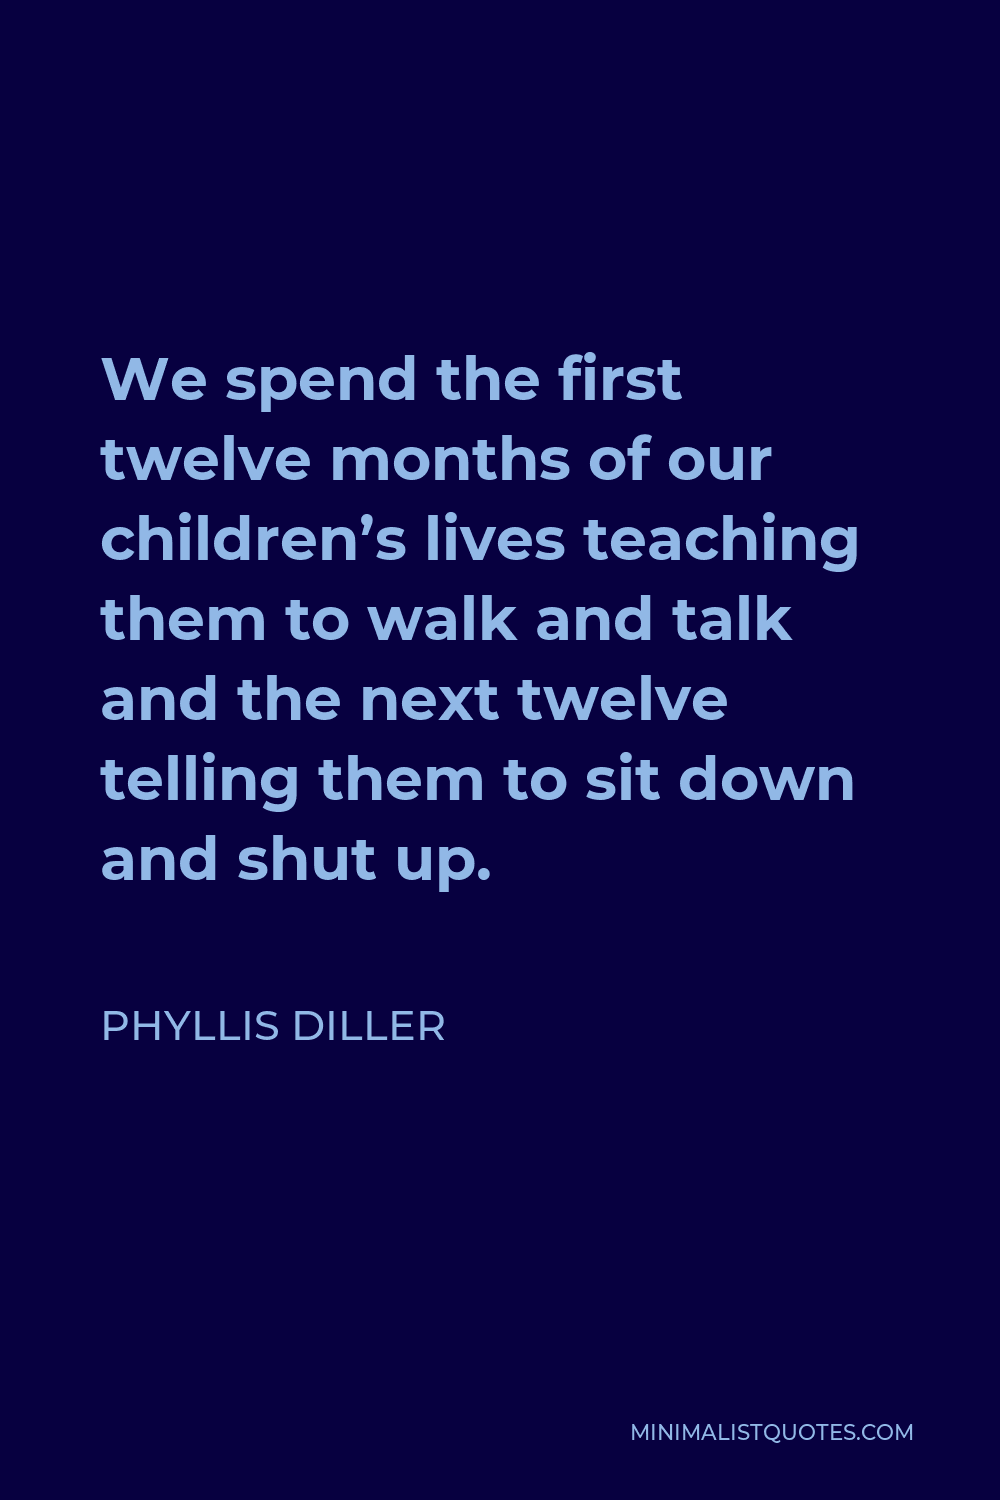 Phyllis Diller Quote - We spend the first twelve months of our children’s lives teaching them to walk and talk and the next twelve telling them to sit down and shut up.